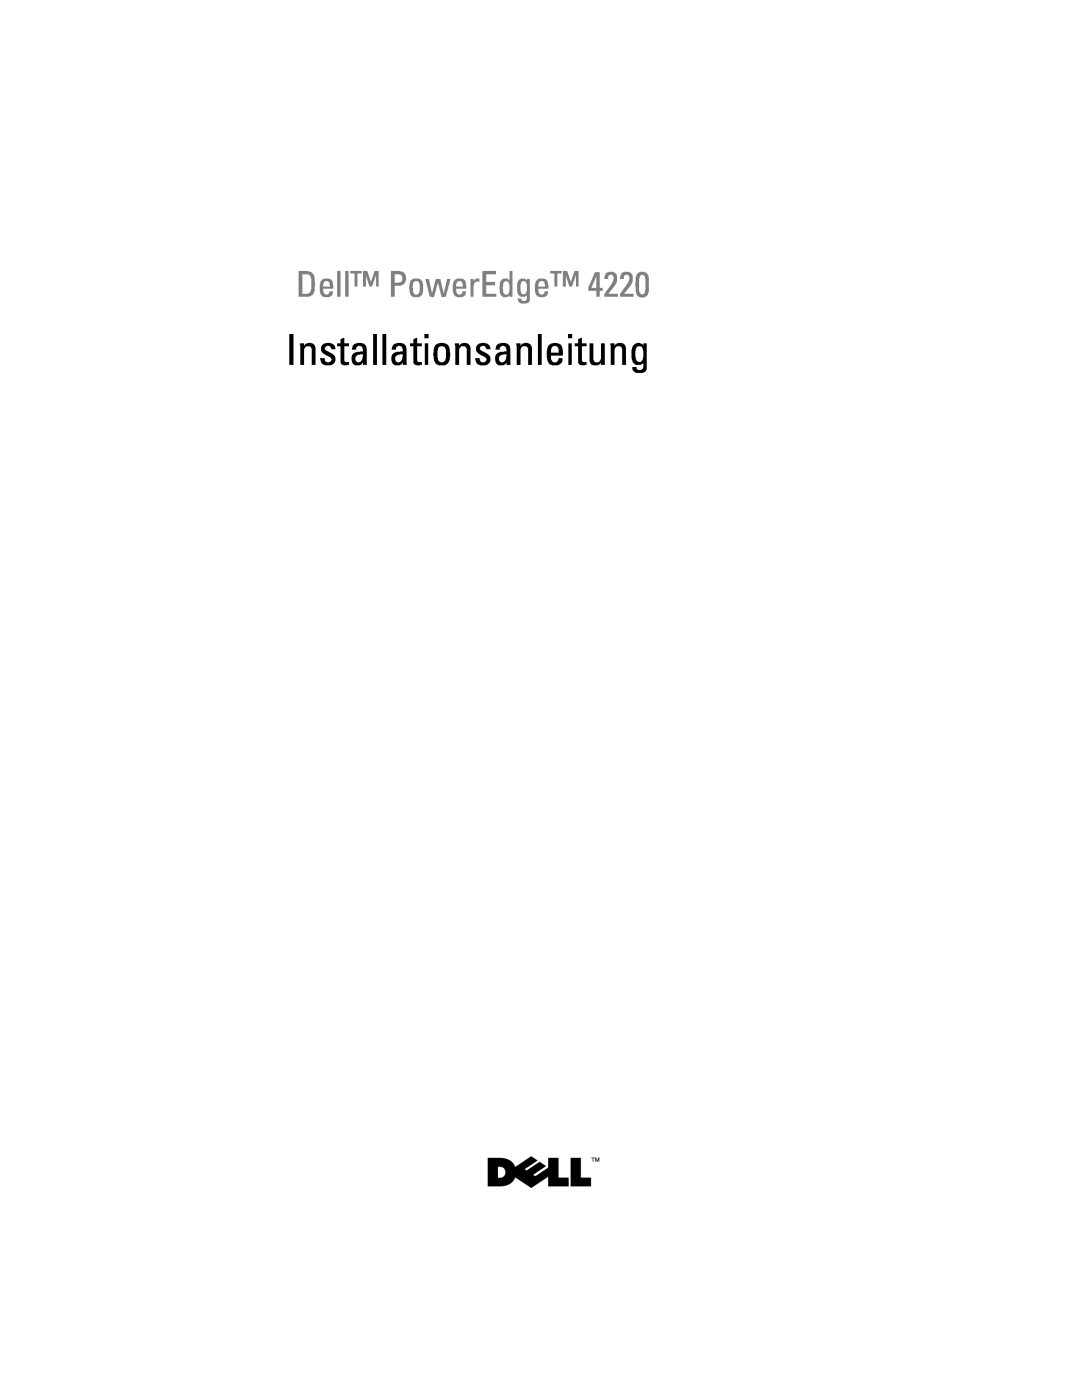 Dell 4220 manual Installationsanleitung, Dell PowerEdge 